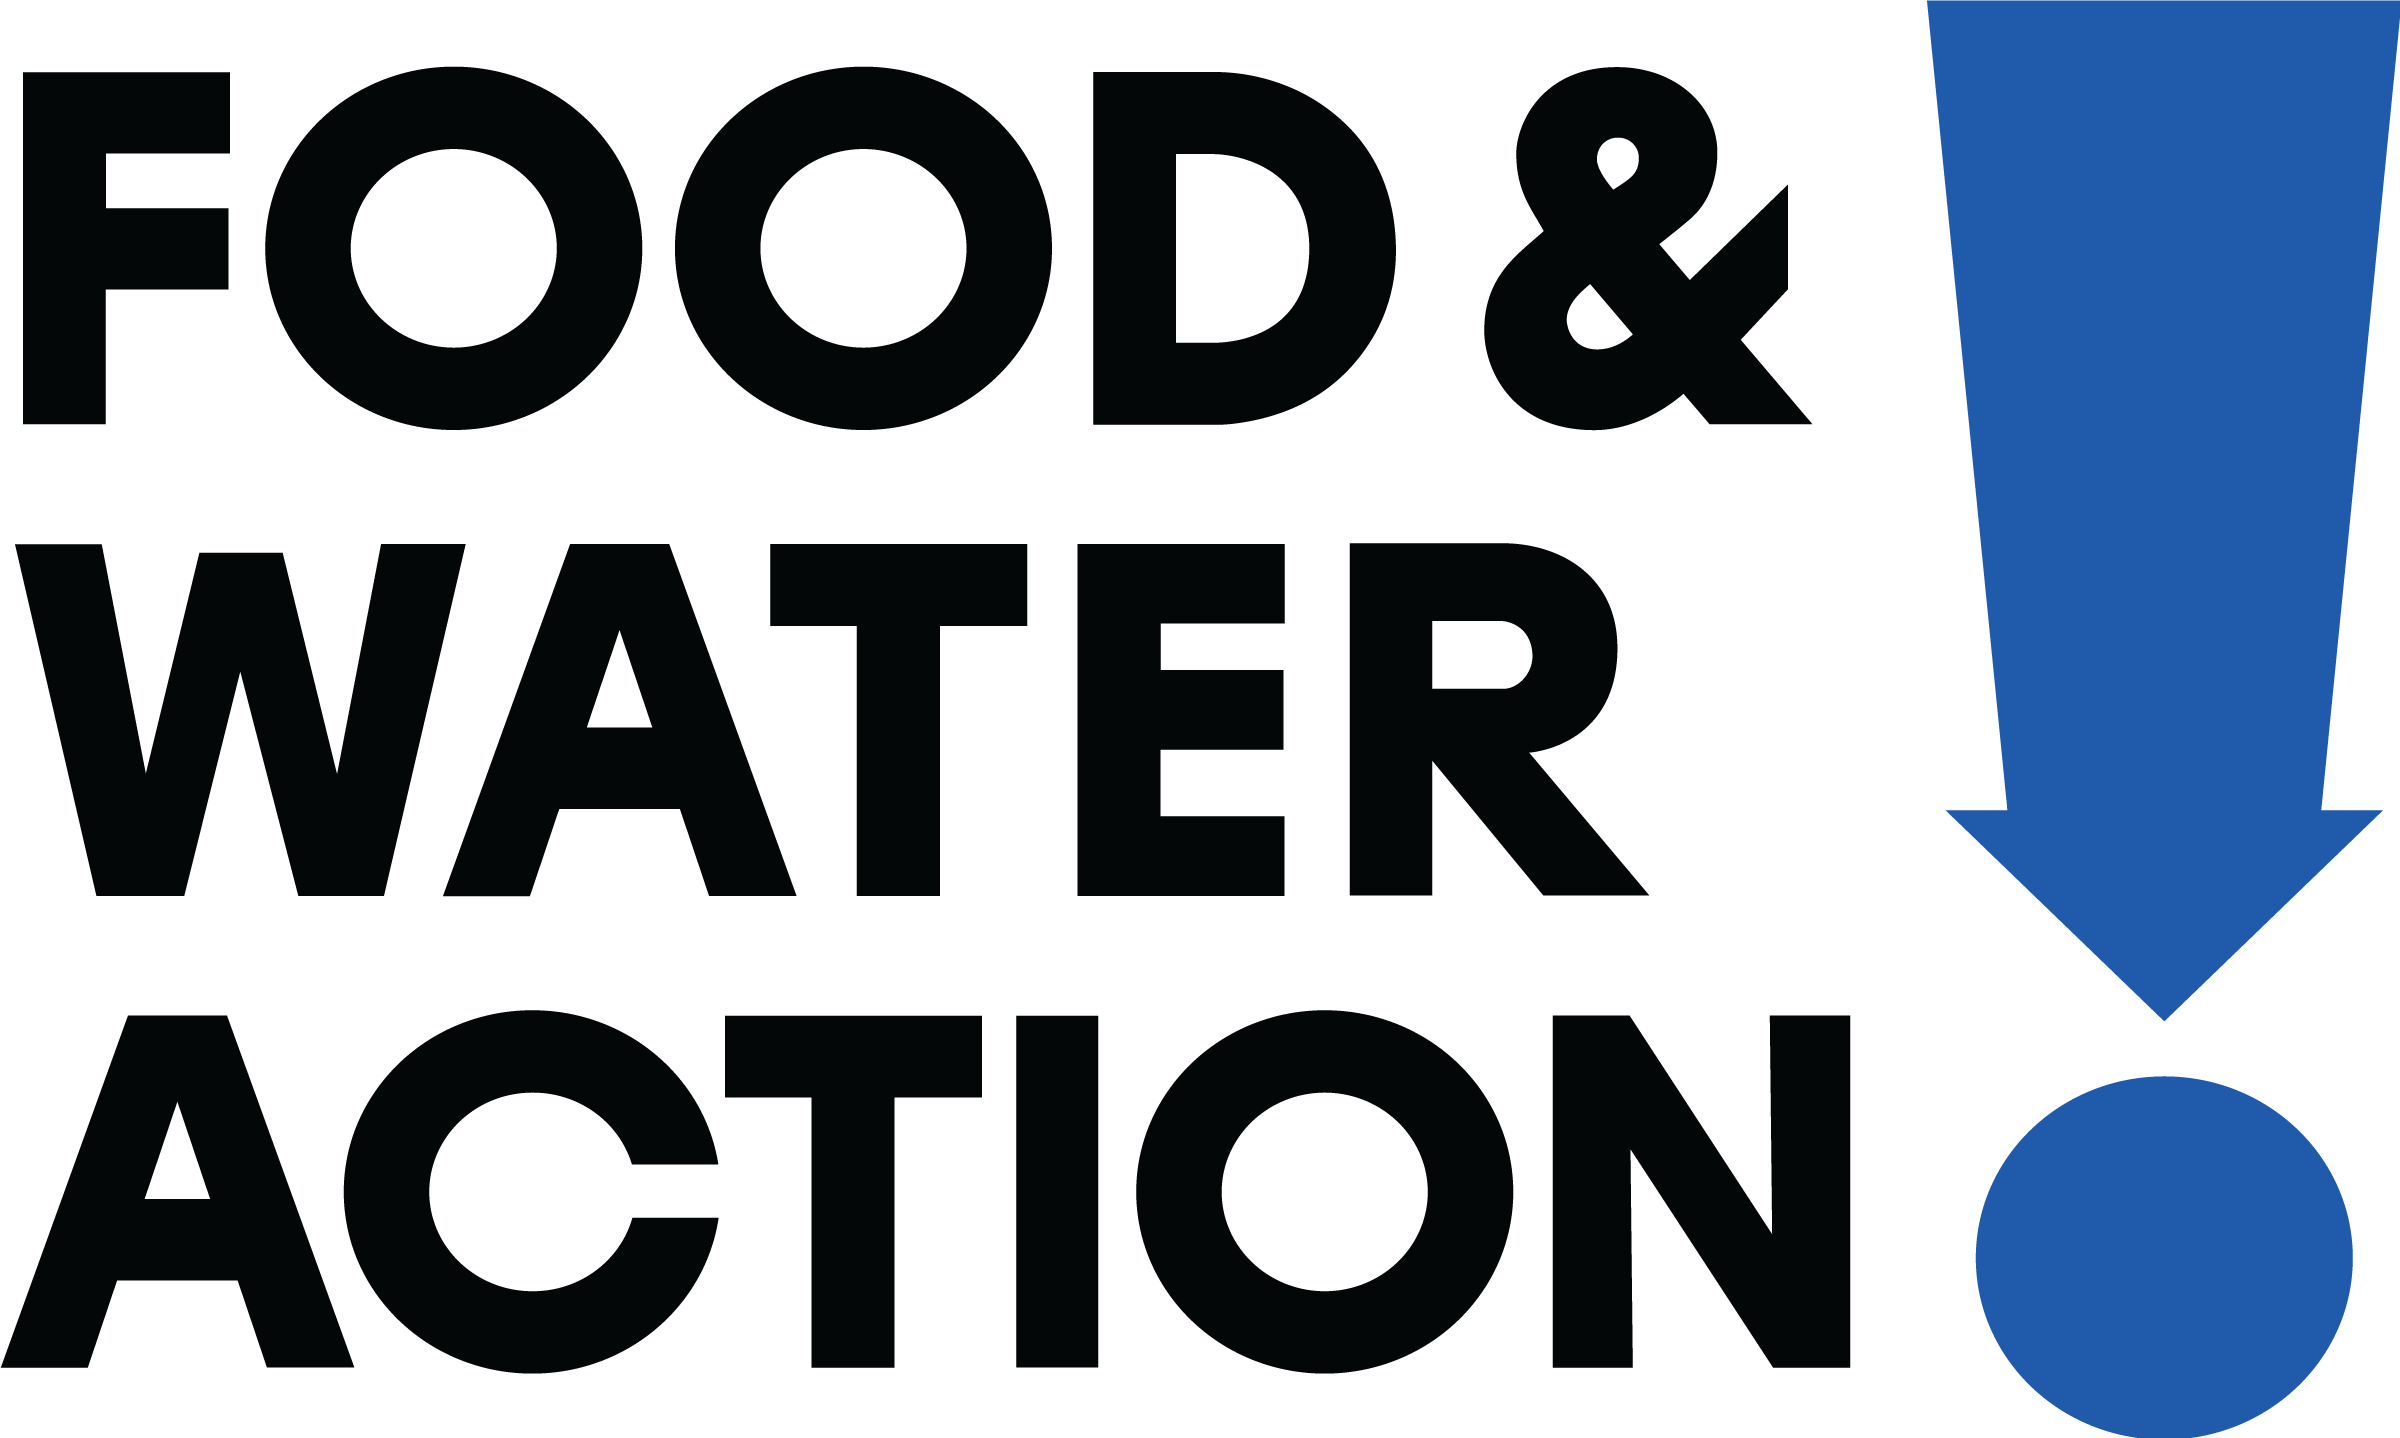 Food & Water Action